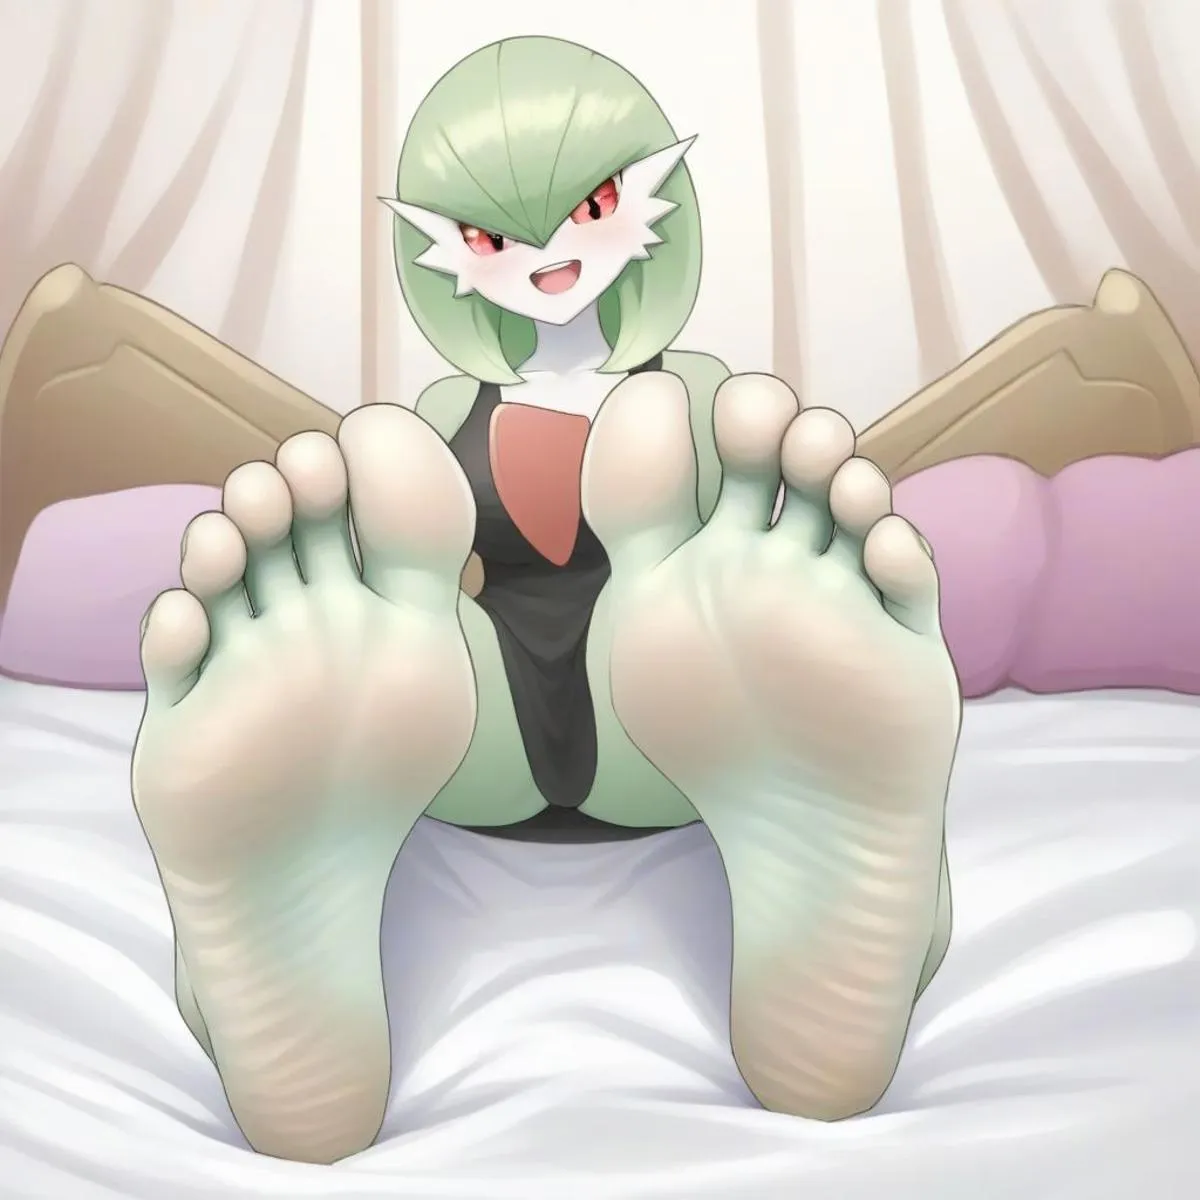 An AI-generated image of Gardevoir, a character from Pokemon, with a focus on her feet, created using Stable Diffusion.